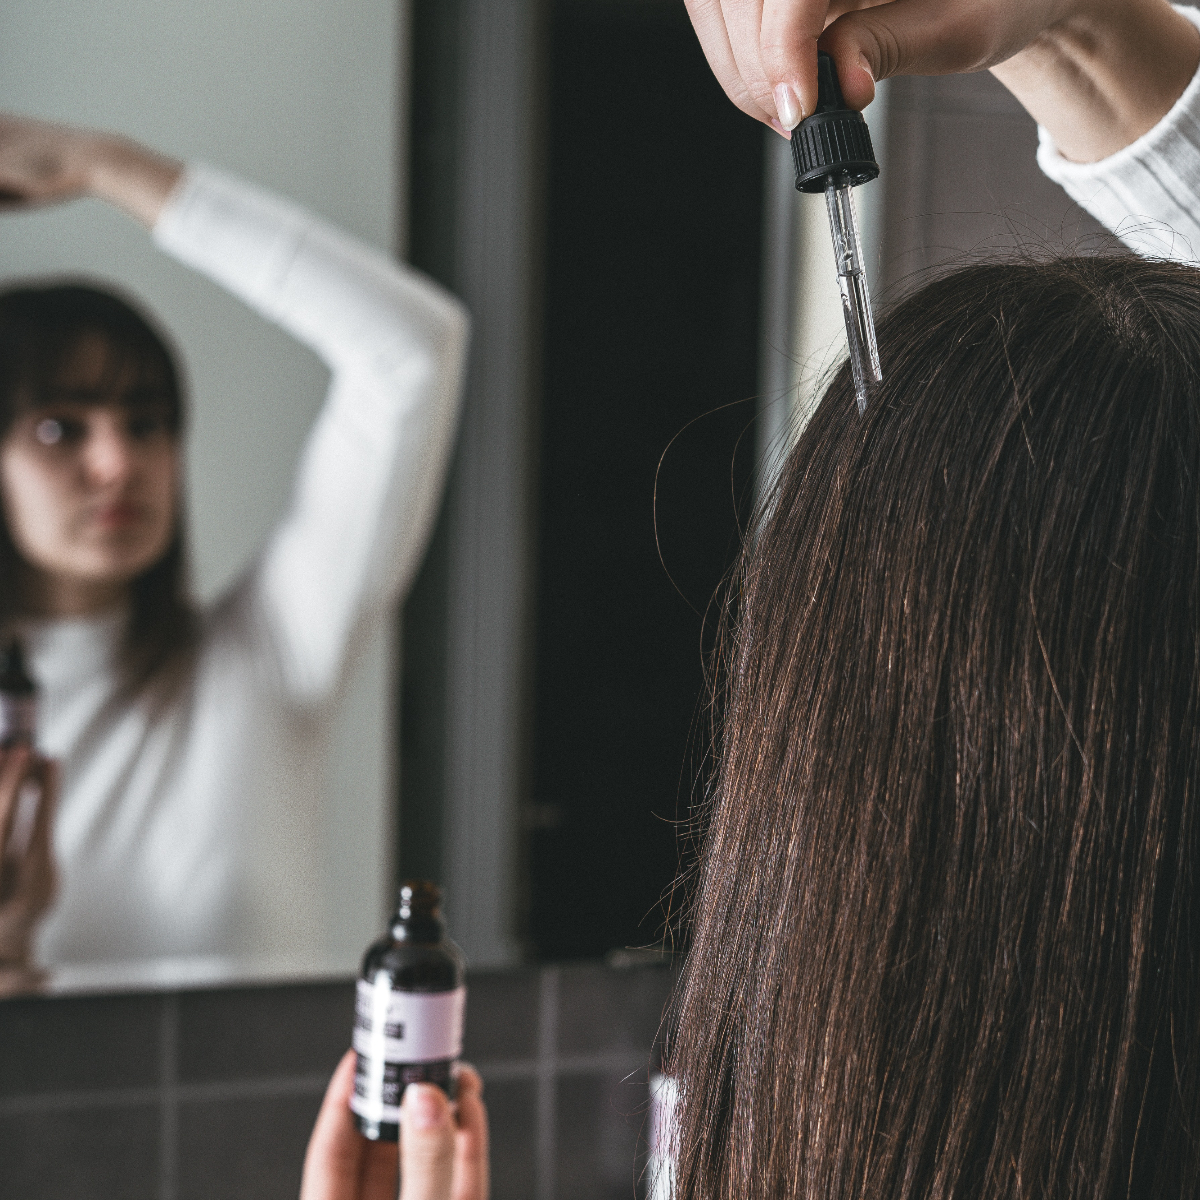 7 Hair serum for grey hair: Grow your mane thicker, darker & healthier with THESE formulations